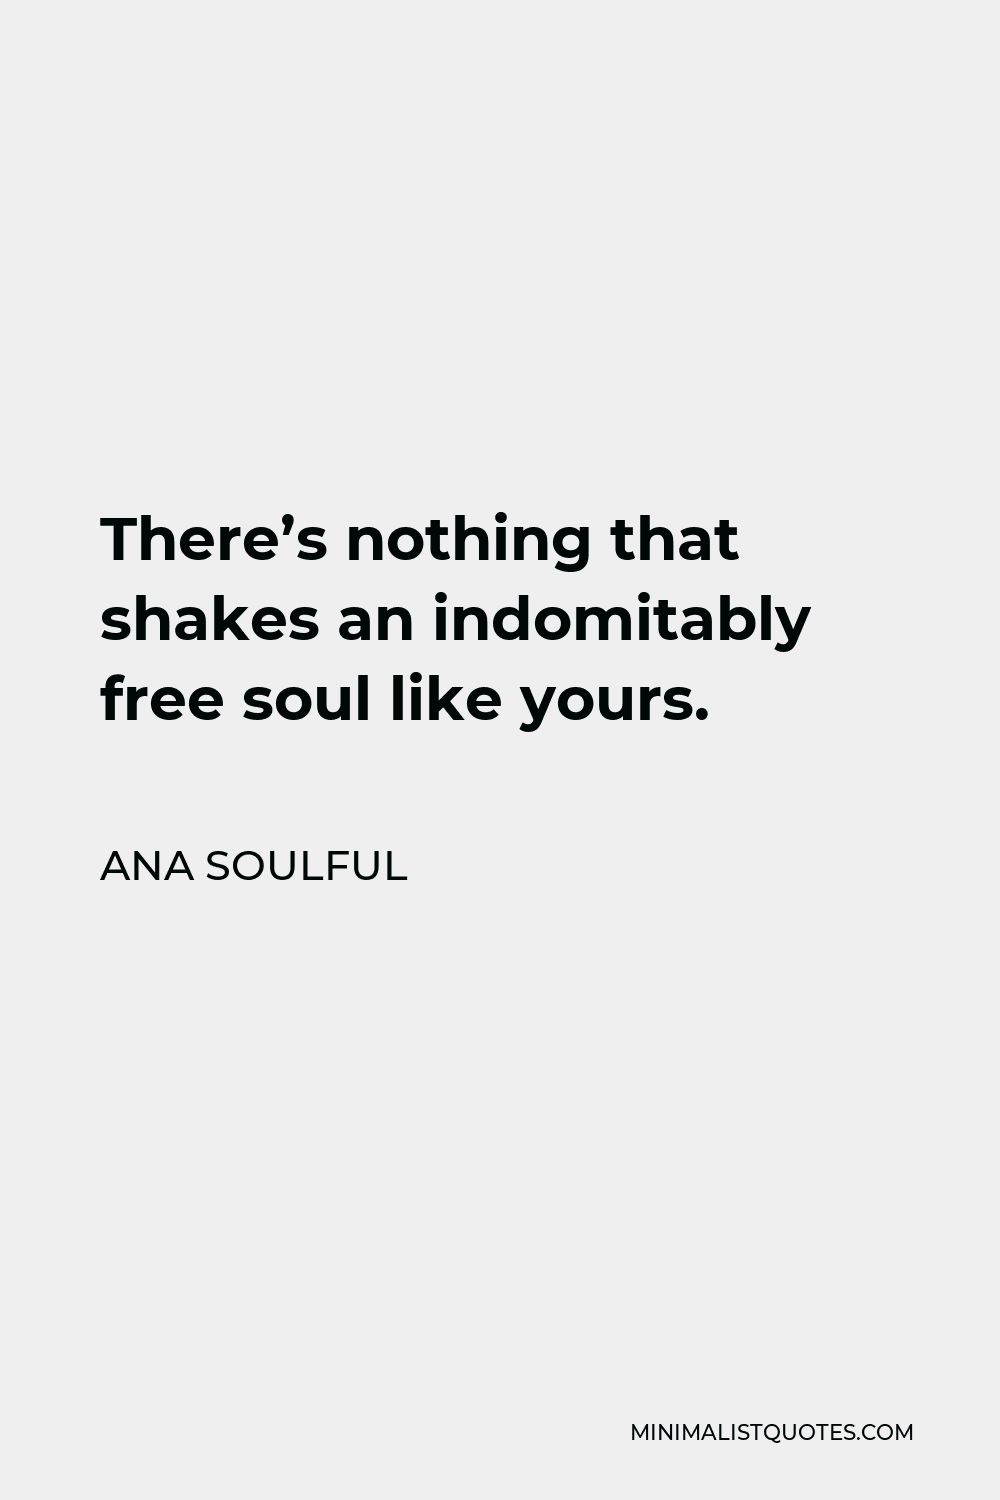 Ana Soulful Quote - There’s nothing that shakes an indomitably free soul like yours.